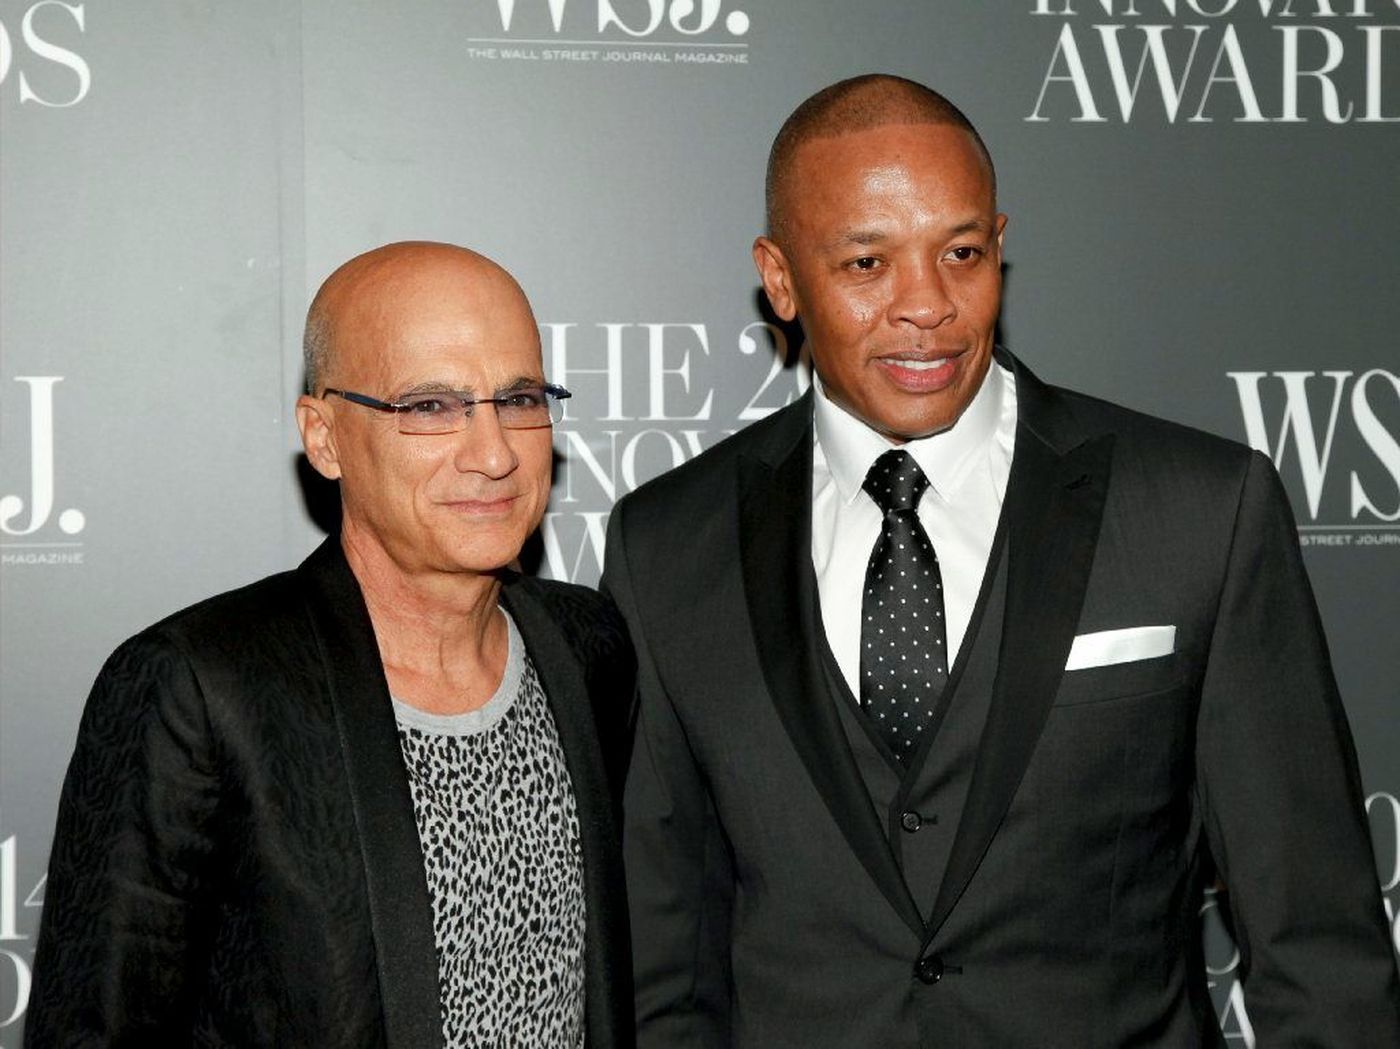 Dr Dre and Jimmy Iovine lose a verdict of over $25 million over Beats headphone royalties